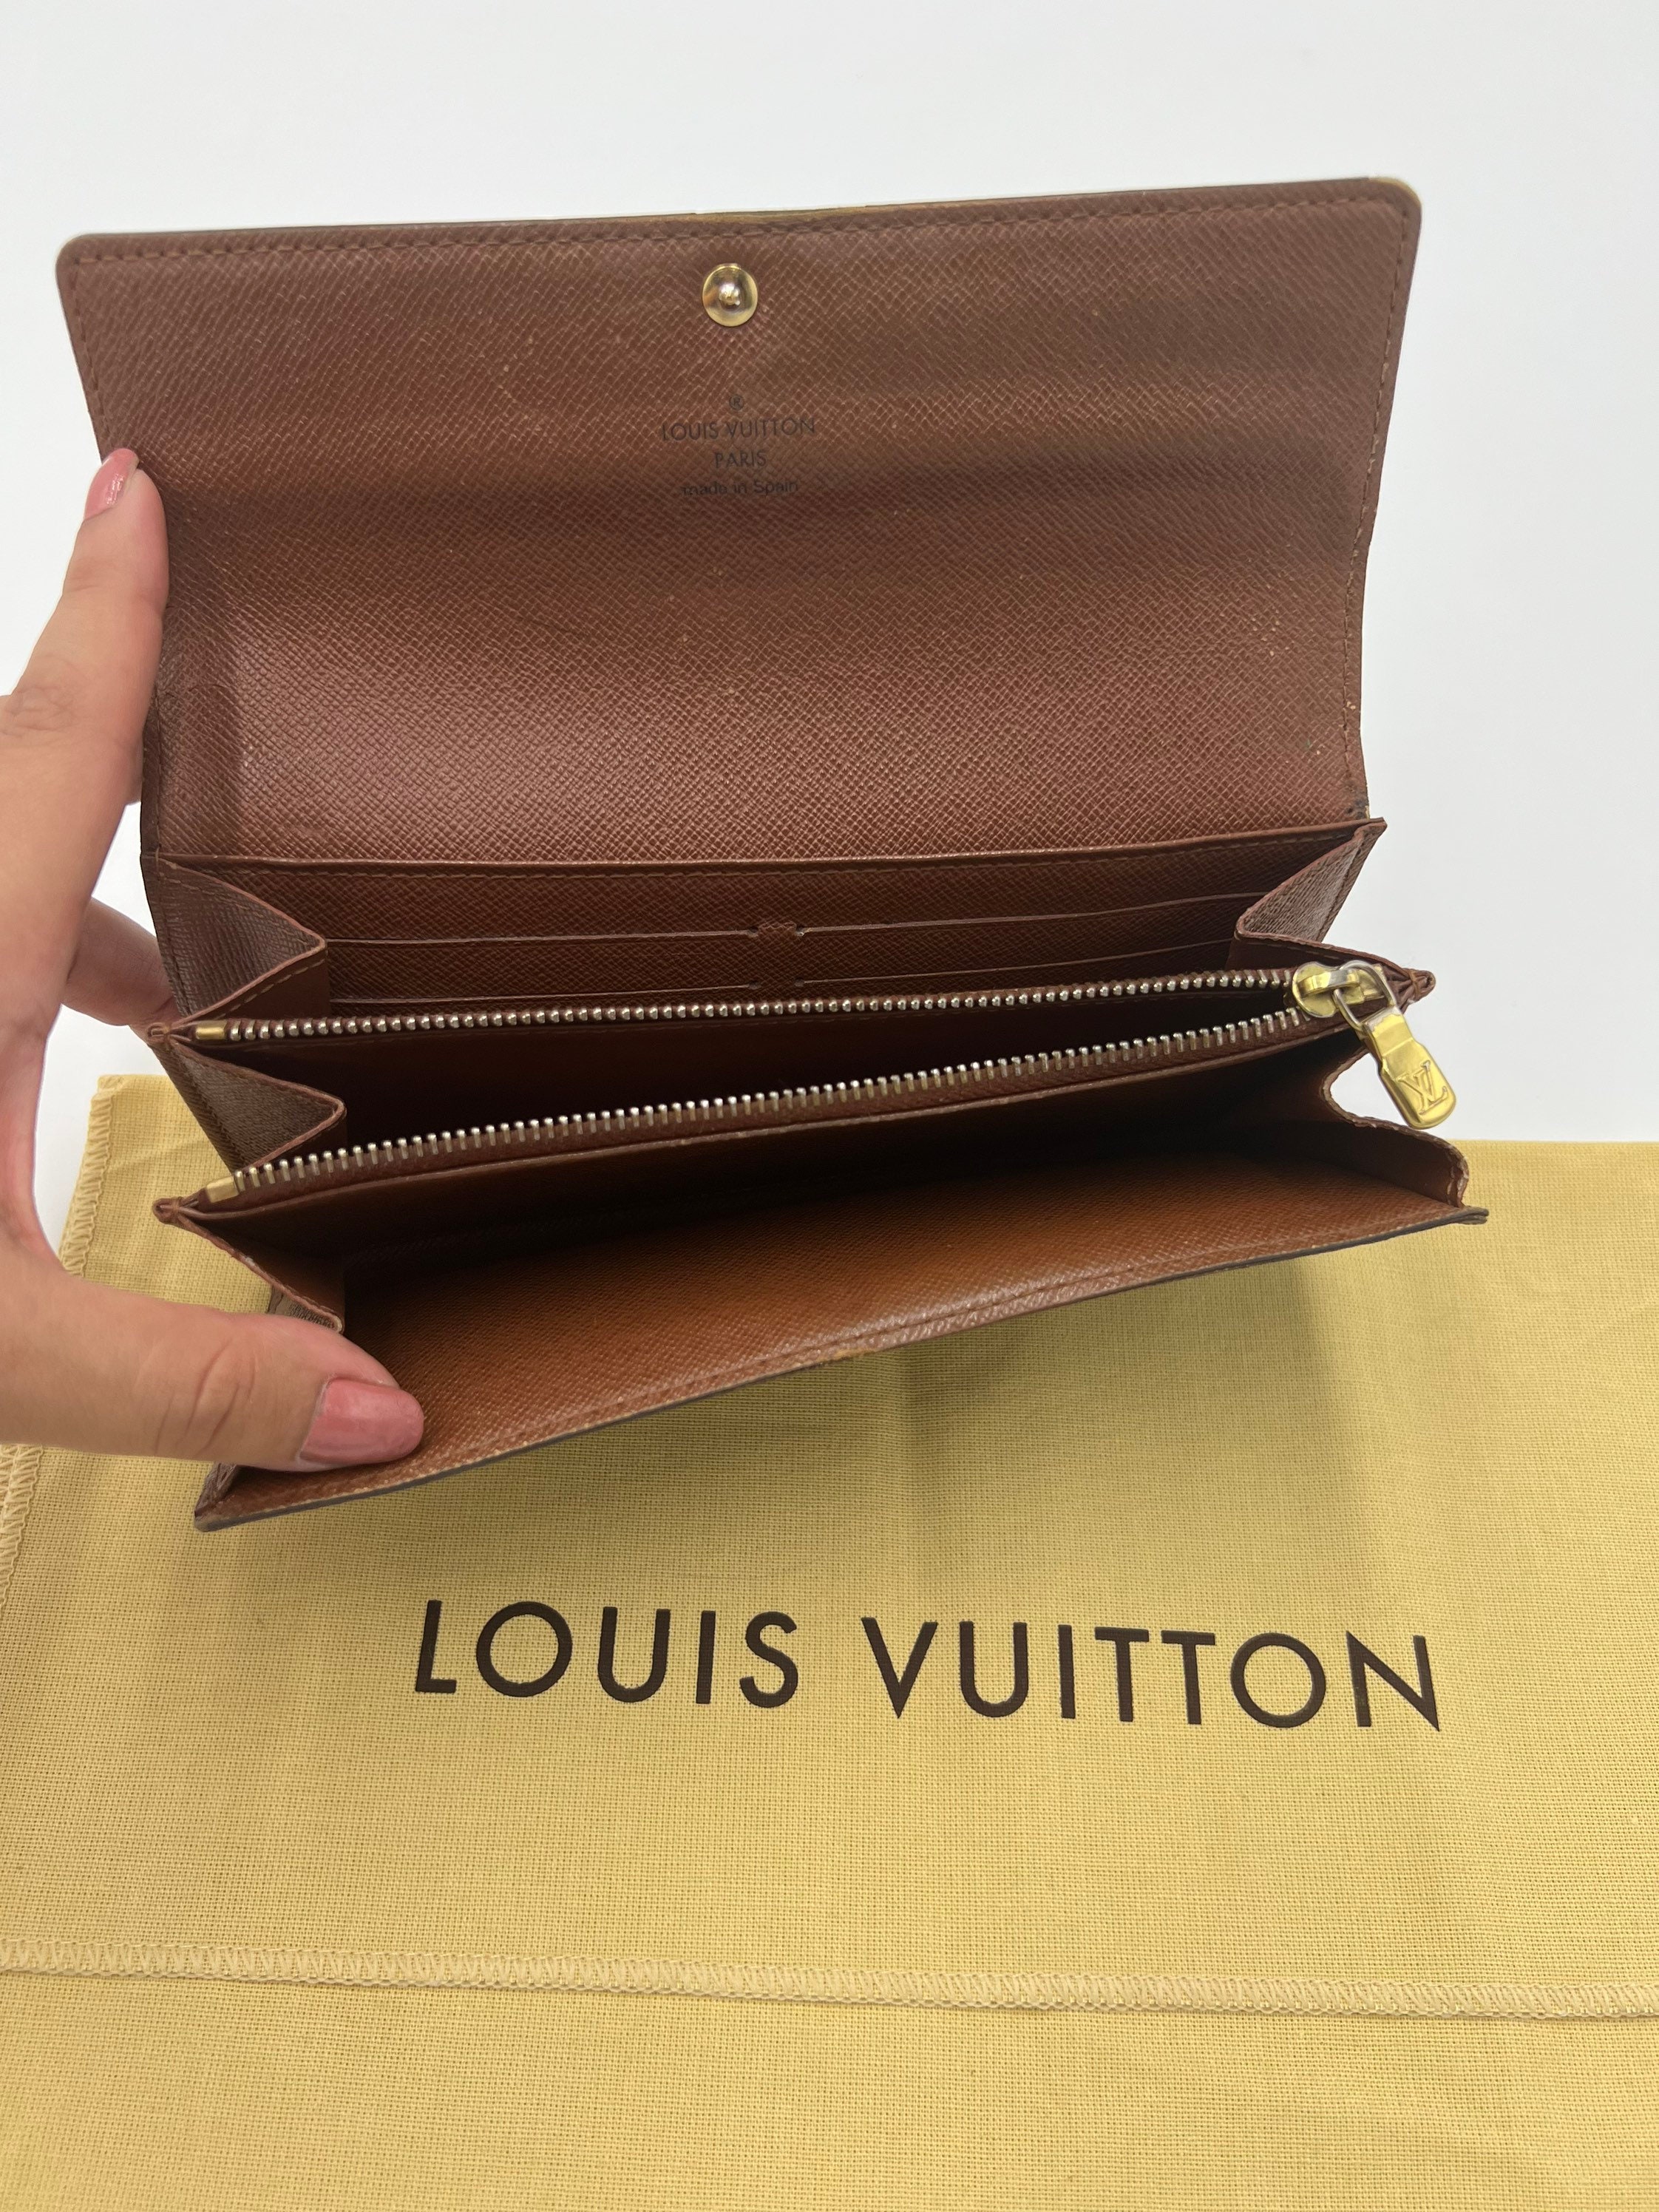 Preloved, Like New condition, LOUIS VUITTON Portefeuille Sarah